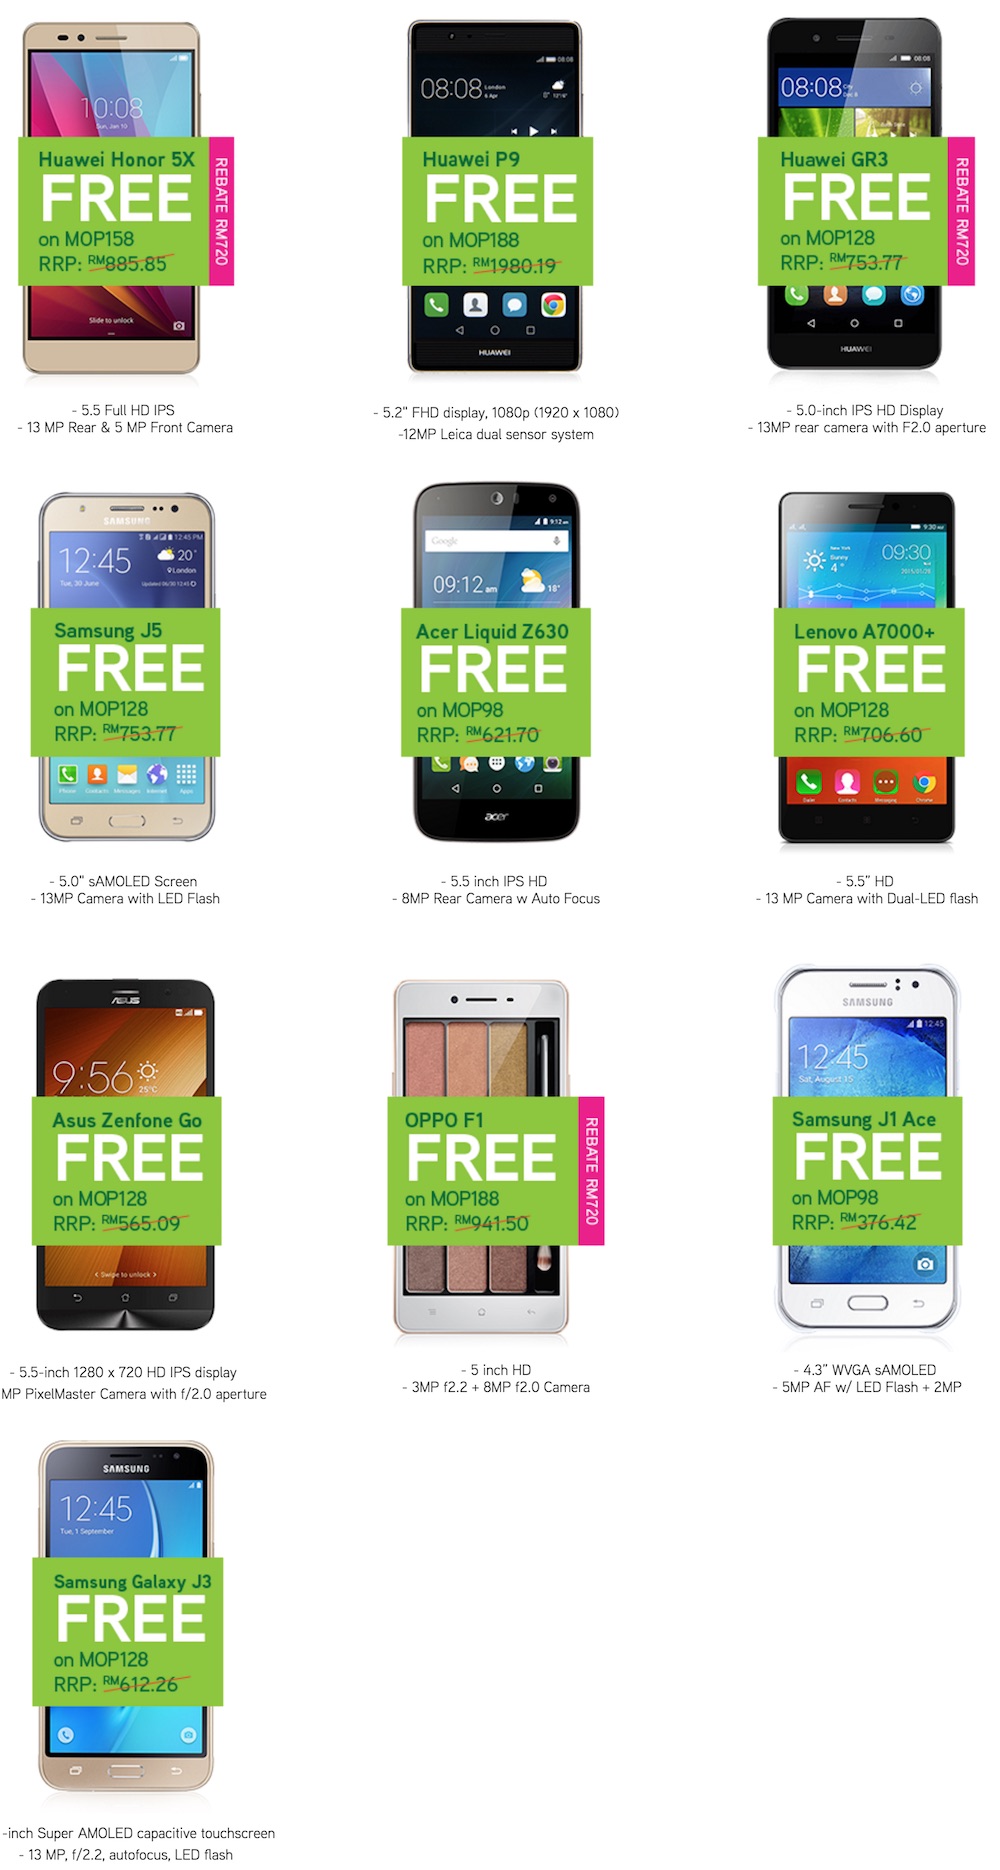 Subscribe to a new MaxisONE plan and get a free smartphone ...